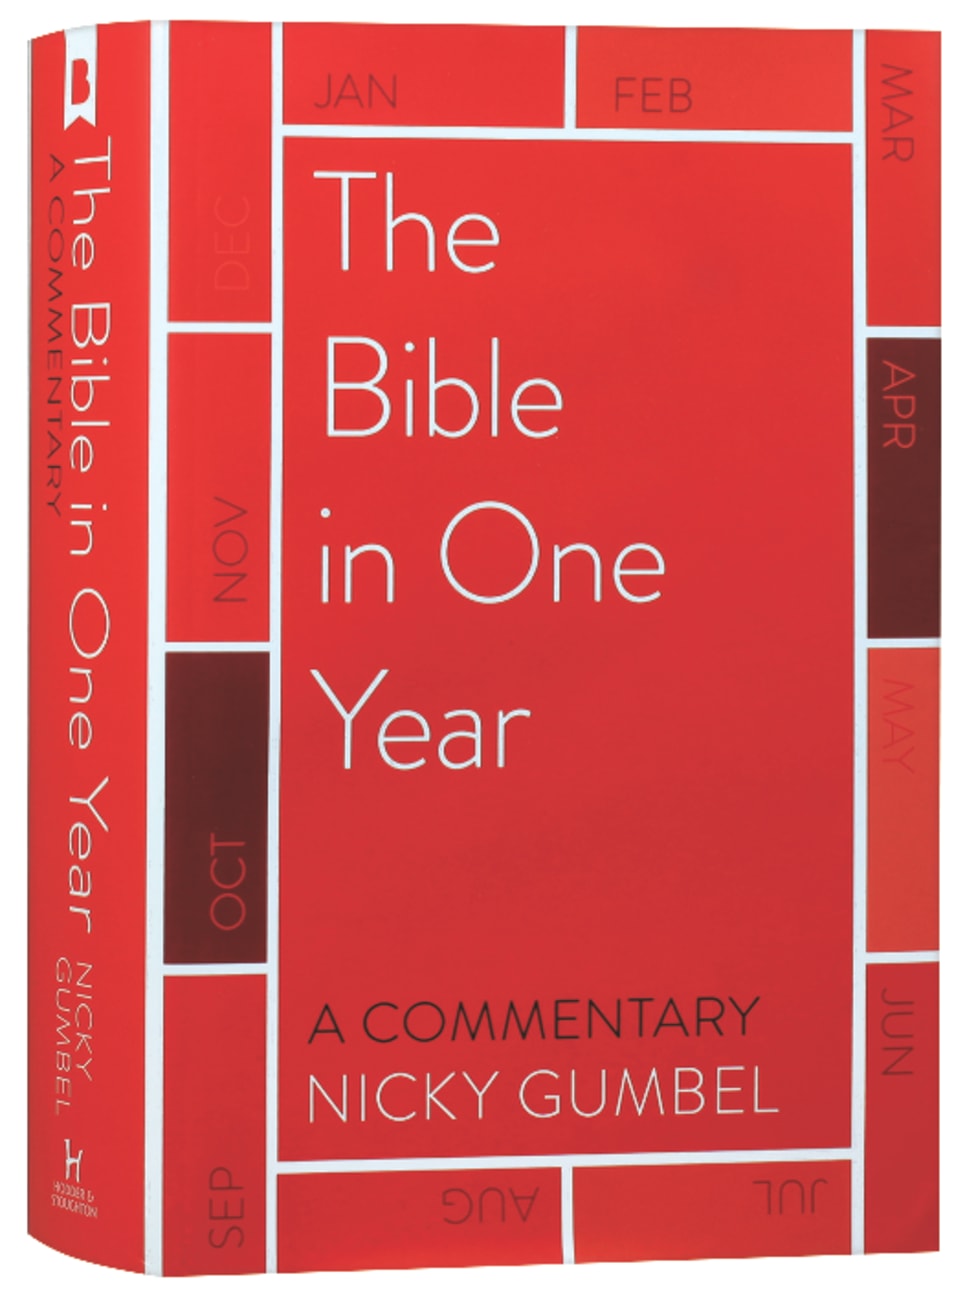 Bible in One Year by Nicky Gumbel Koorong